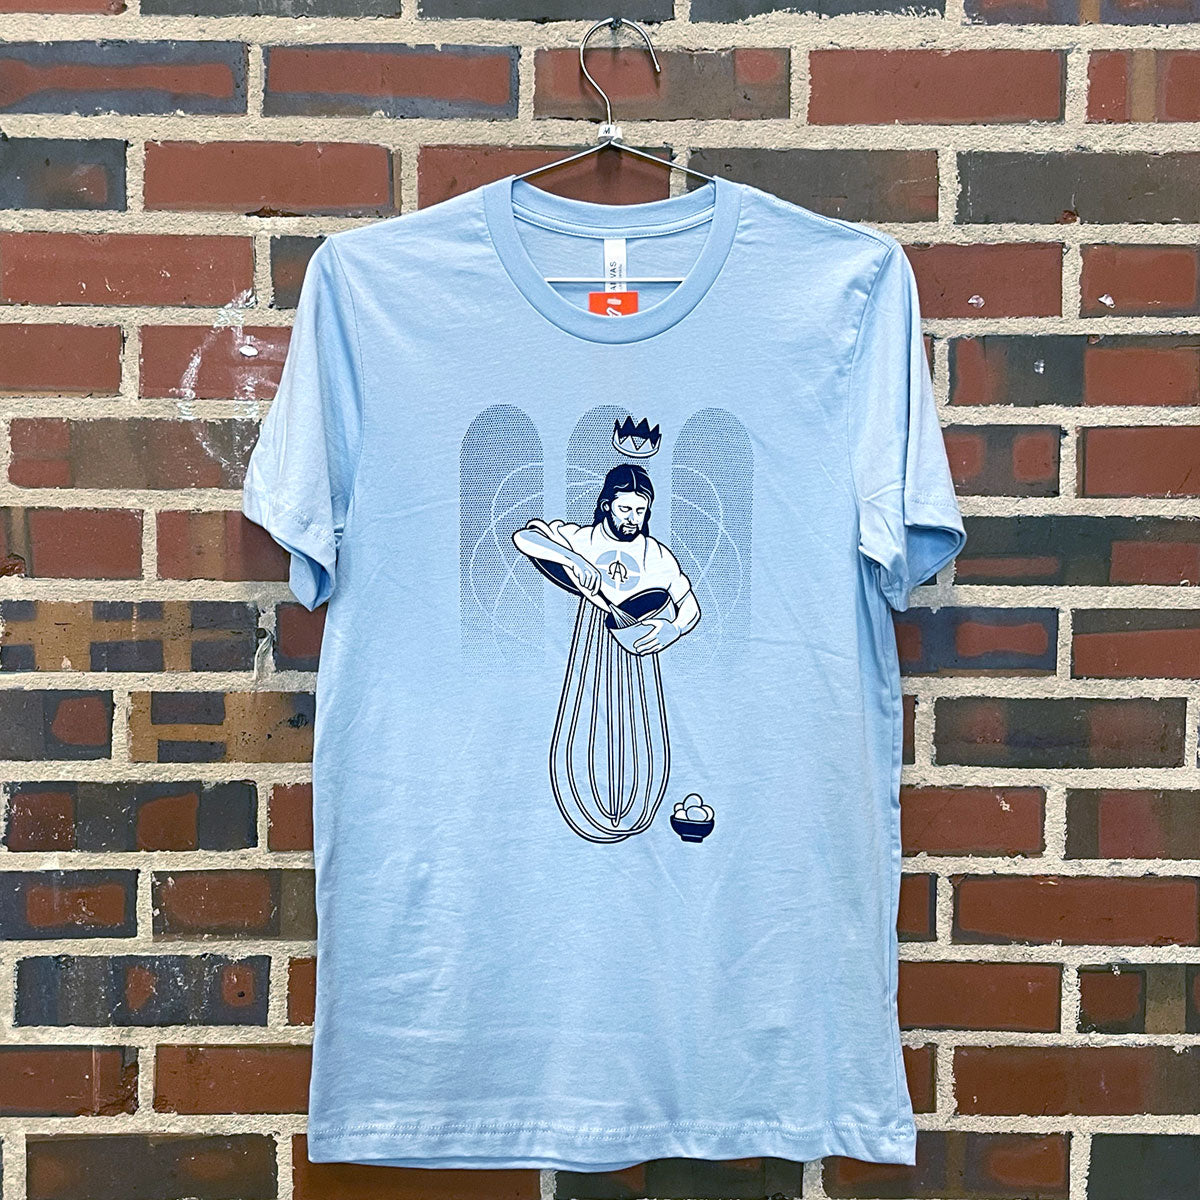 Image of Eggbeater Jesus with mixing bowl on blue t-shirt hanging against brick wall at Lowe Mill